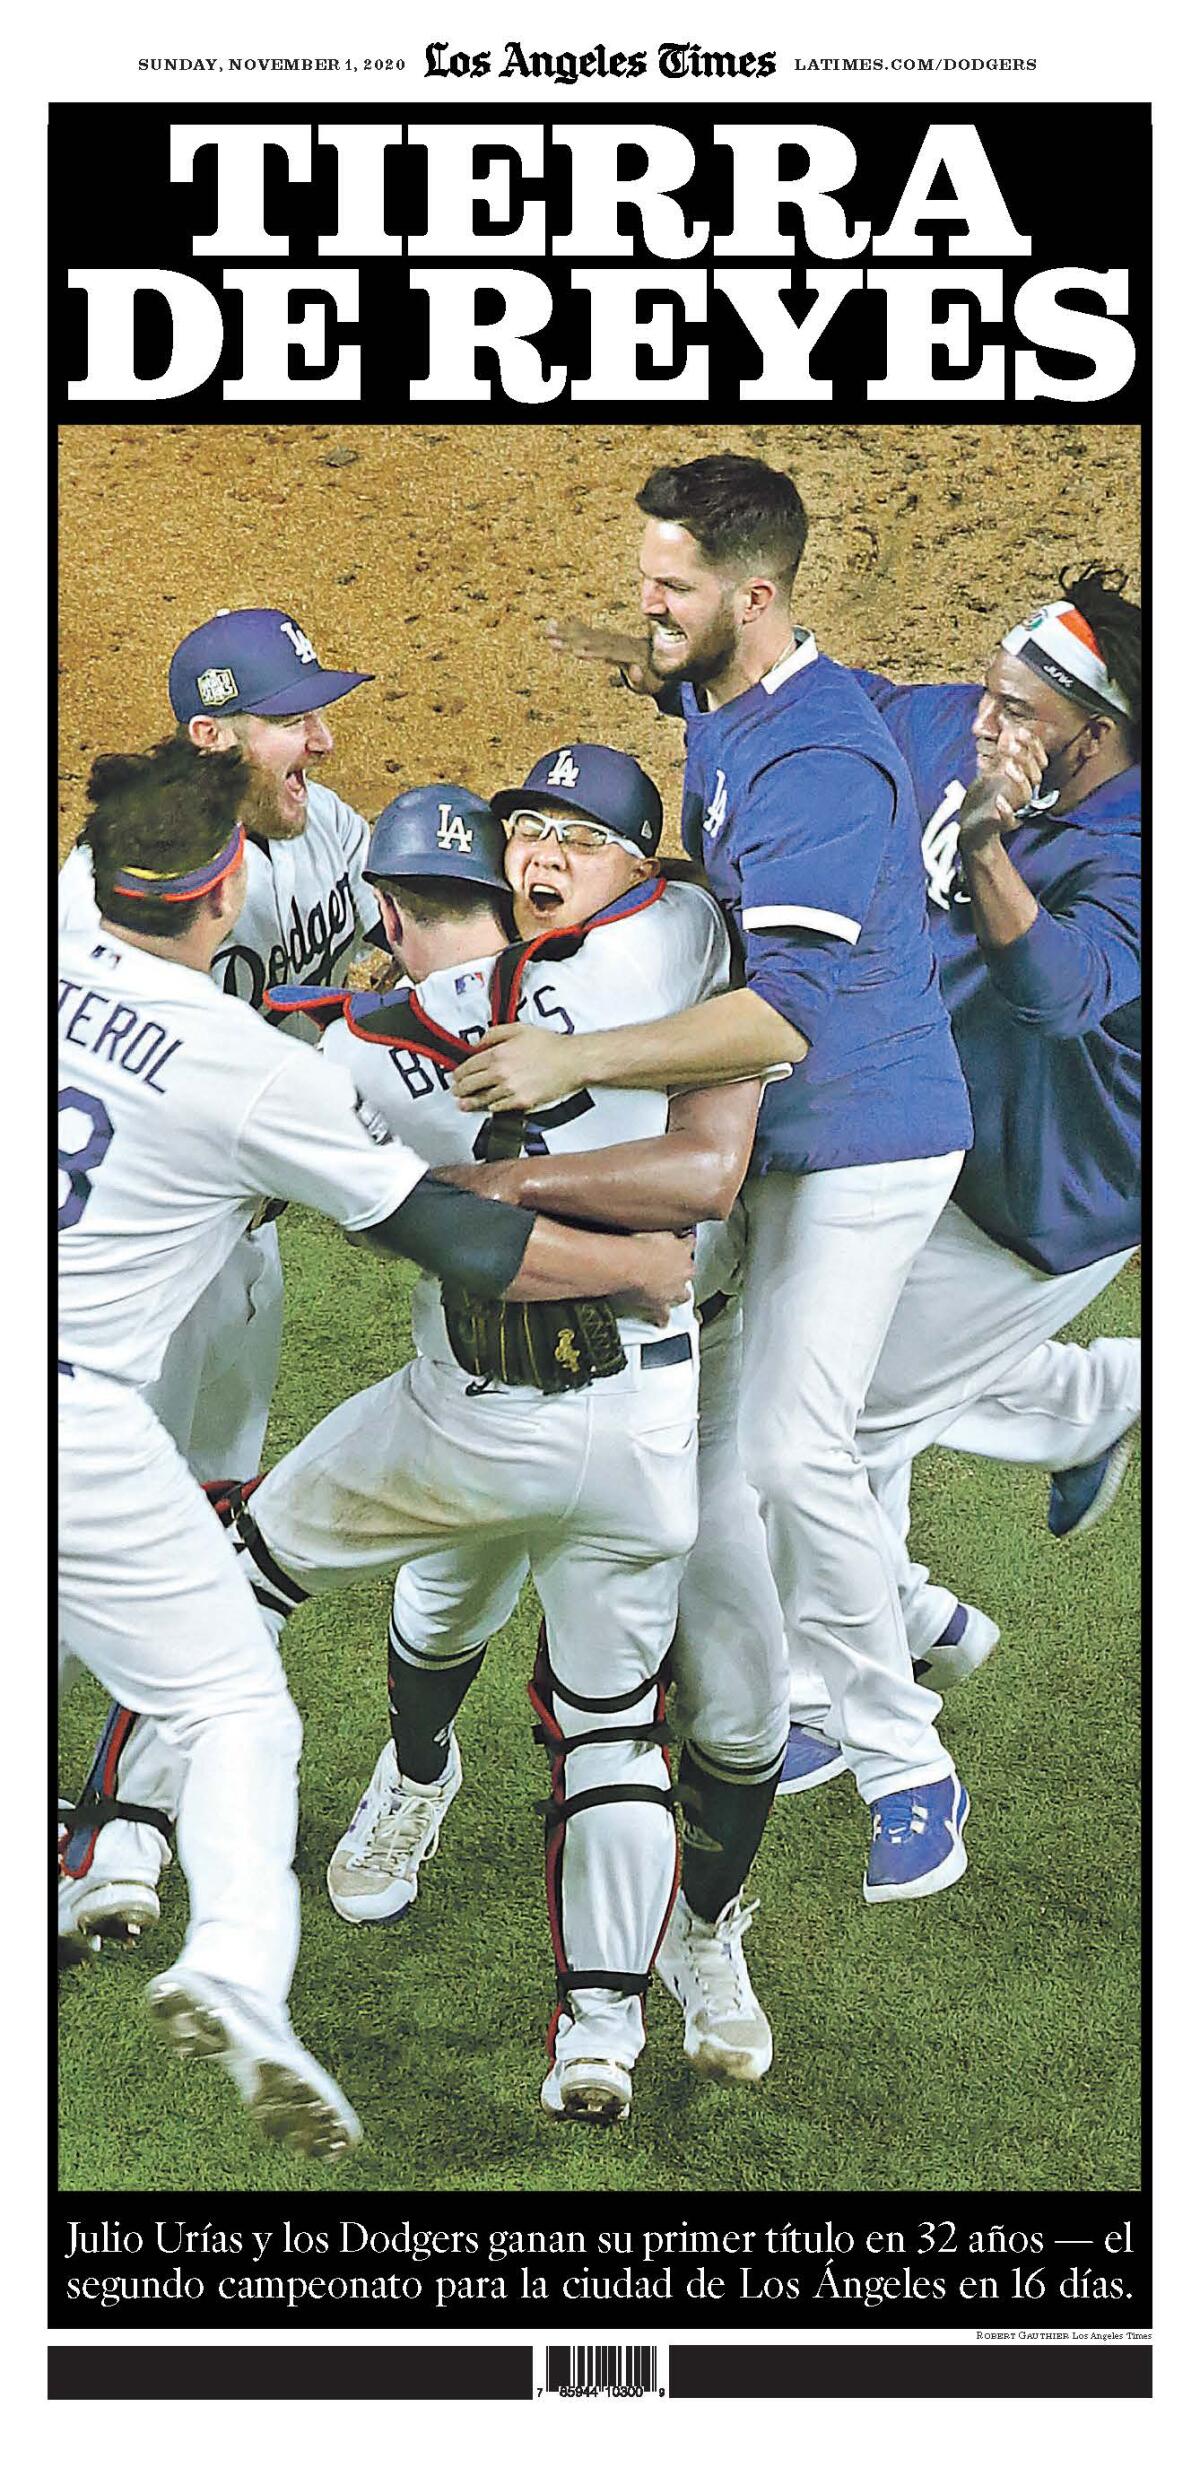 The Spanish-language coverage in the Los Angles Times Dodgers championship special section